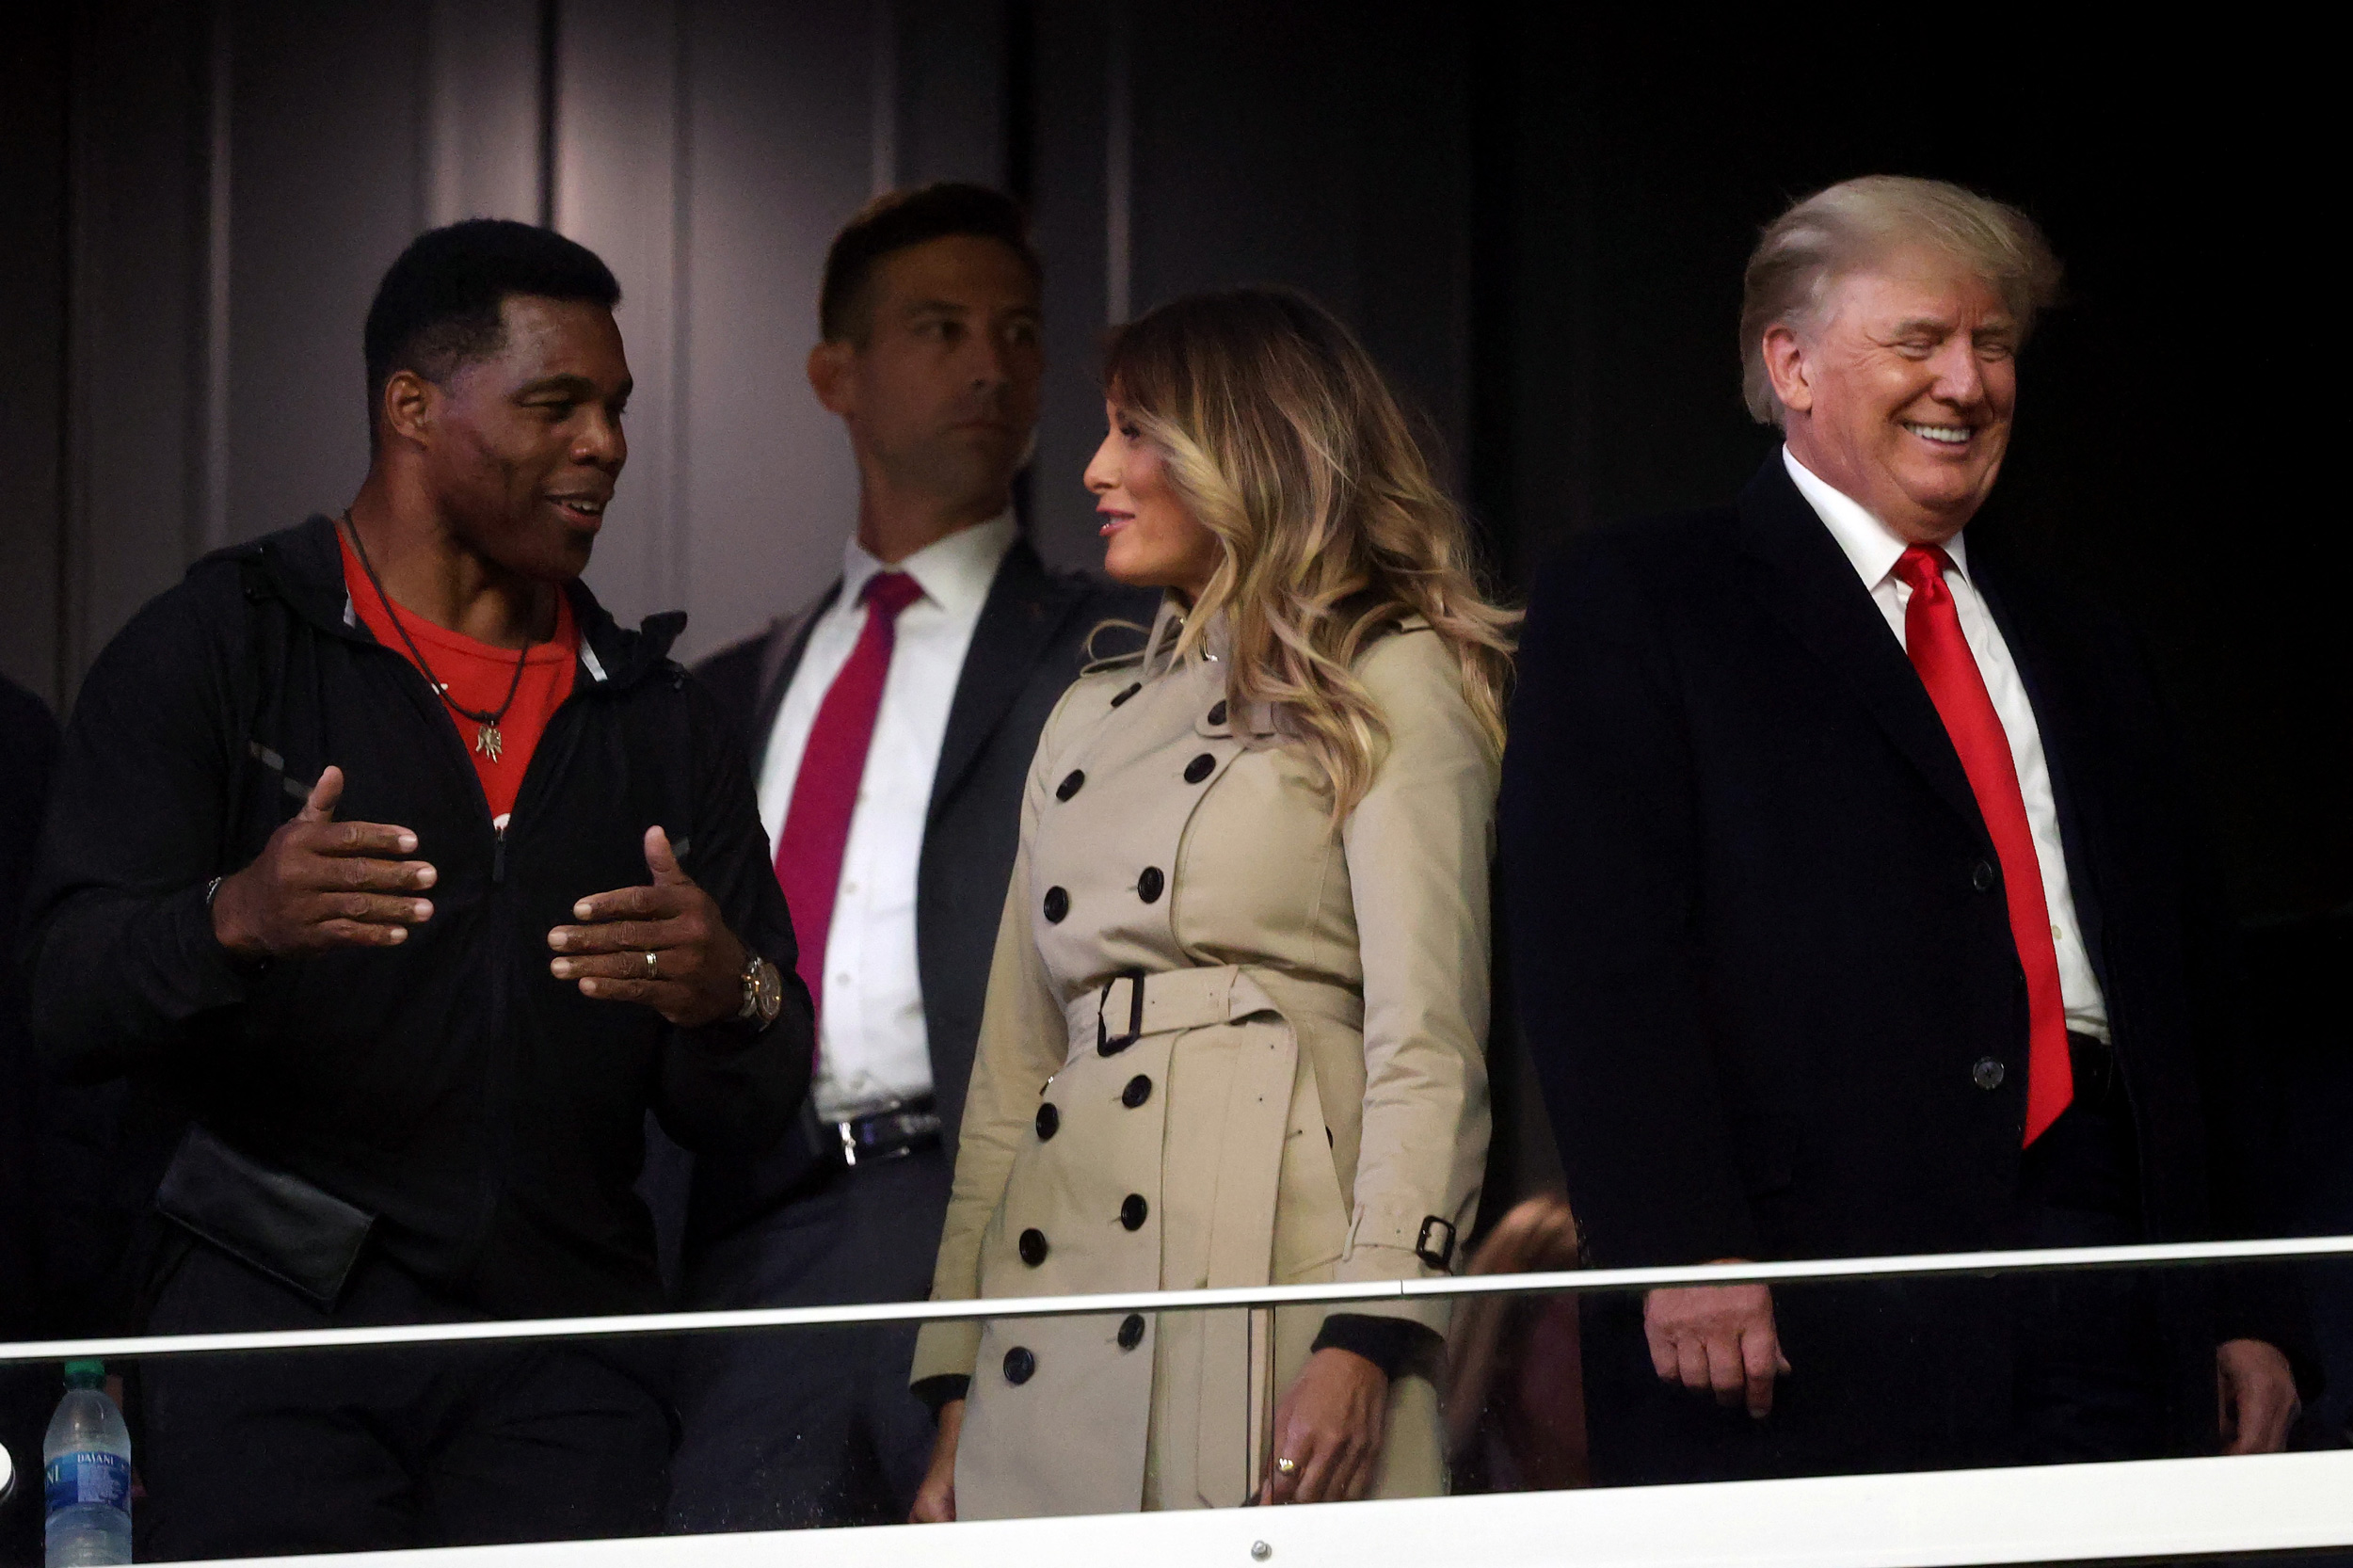 Former football player and political candidate Herschel Walker interacts with former first lady Melania Trump and former President Donald Trump prior to Game Four of the World Series on October 30 in Atlanta.